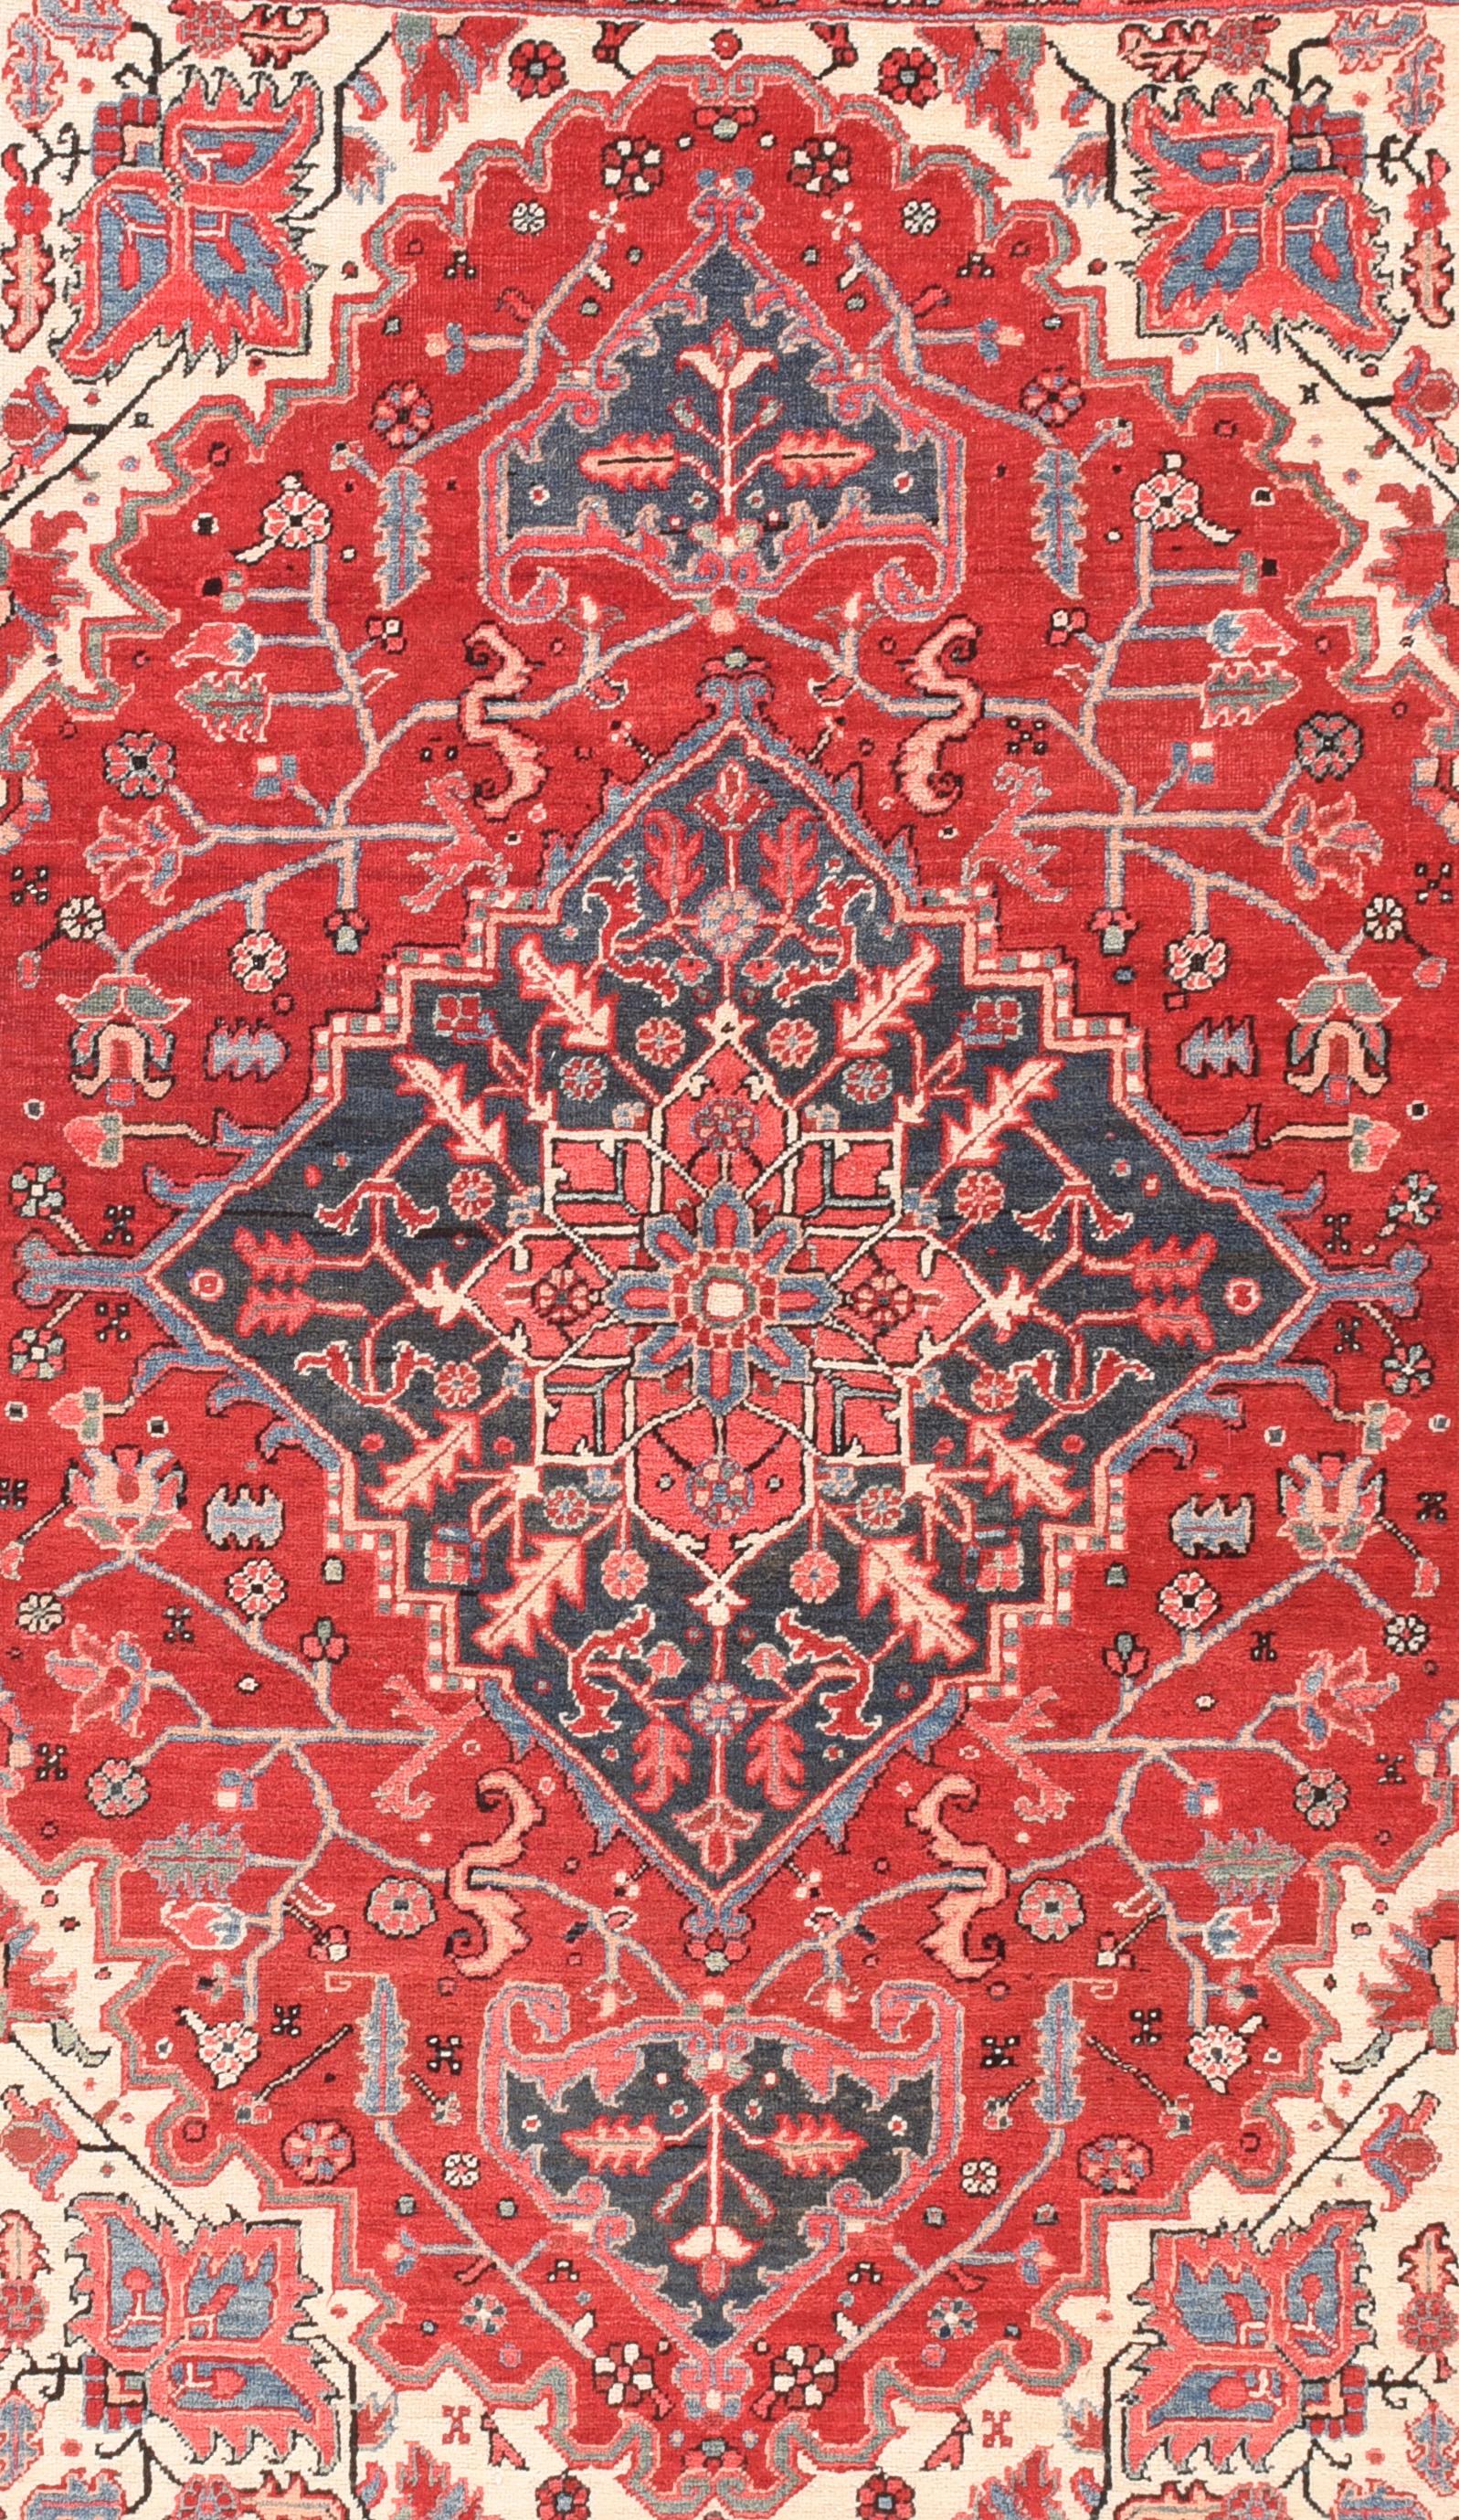 Looks like a room size, but this uncommon scatter format NW Persian village scatter shows a vivid natural dye palette with a tomato madder red field centred by a partially stepped navy fiamond medallion filled with serrated, radiating leaves and a